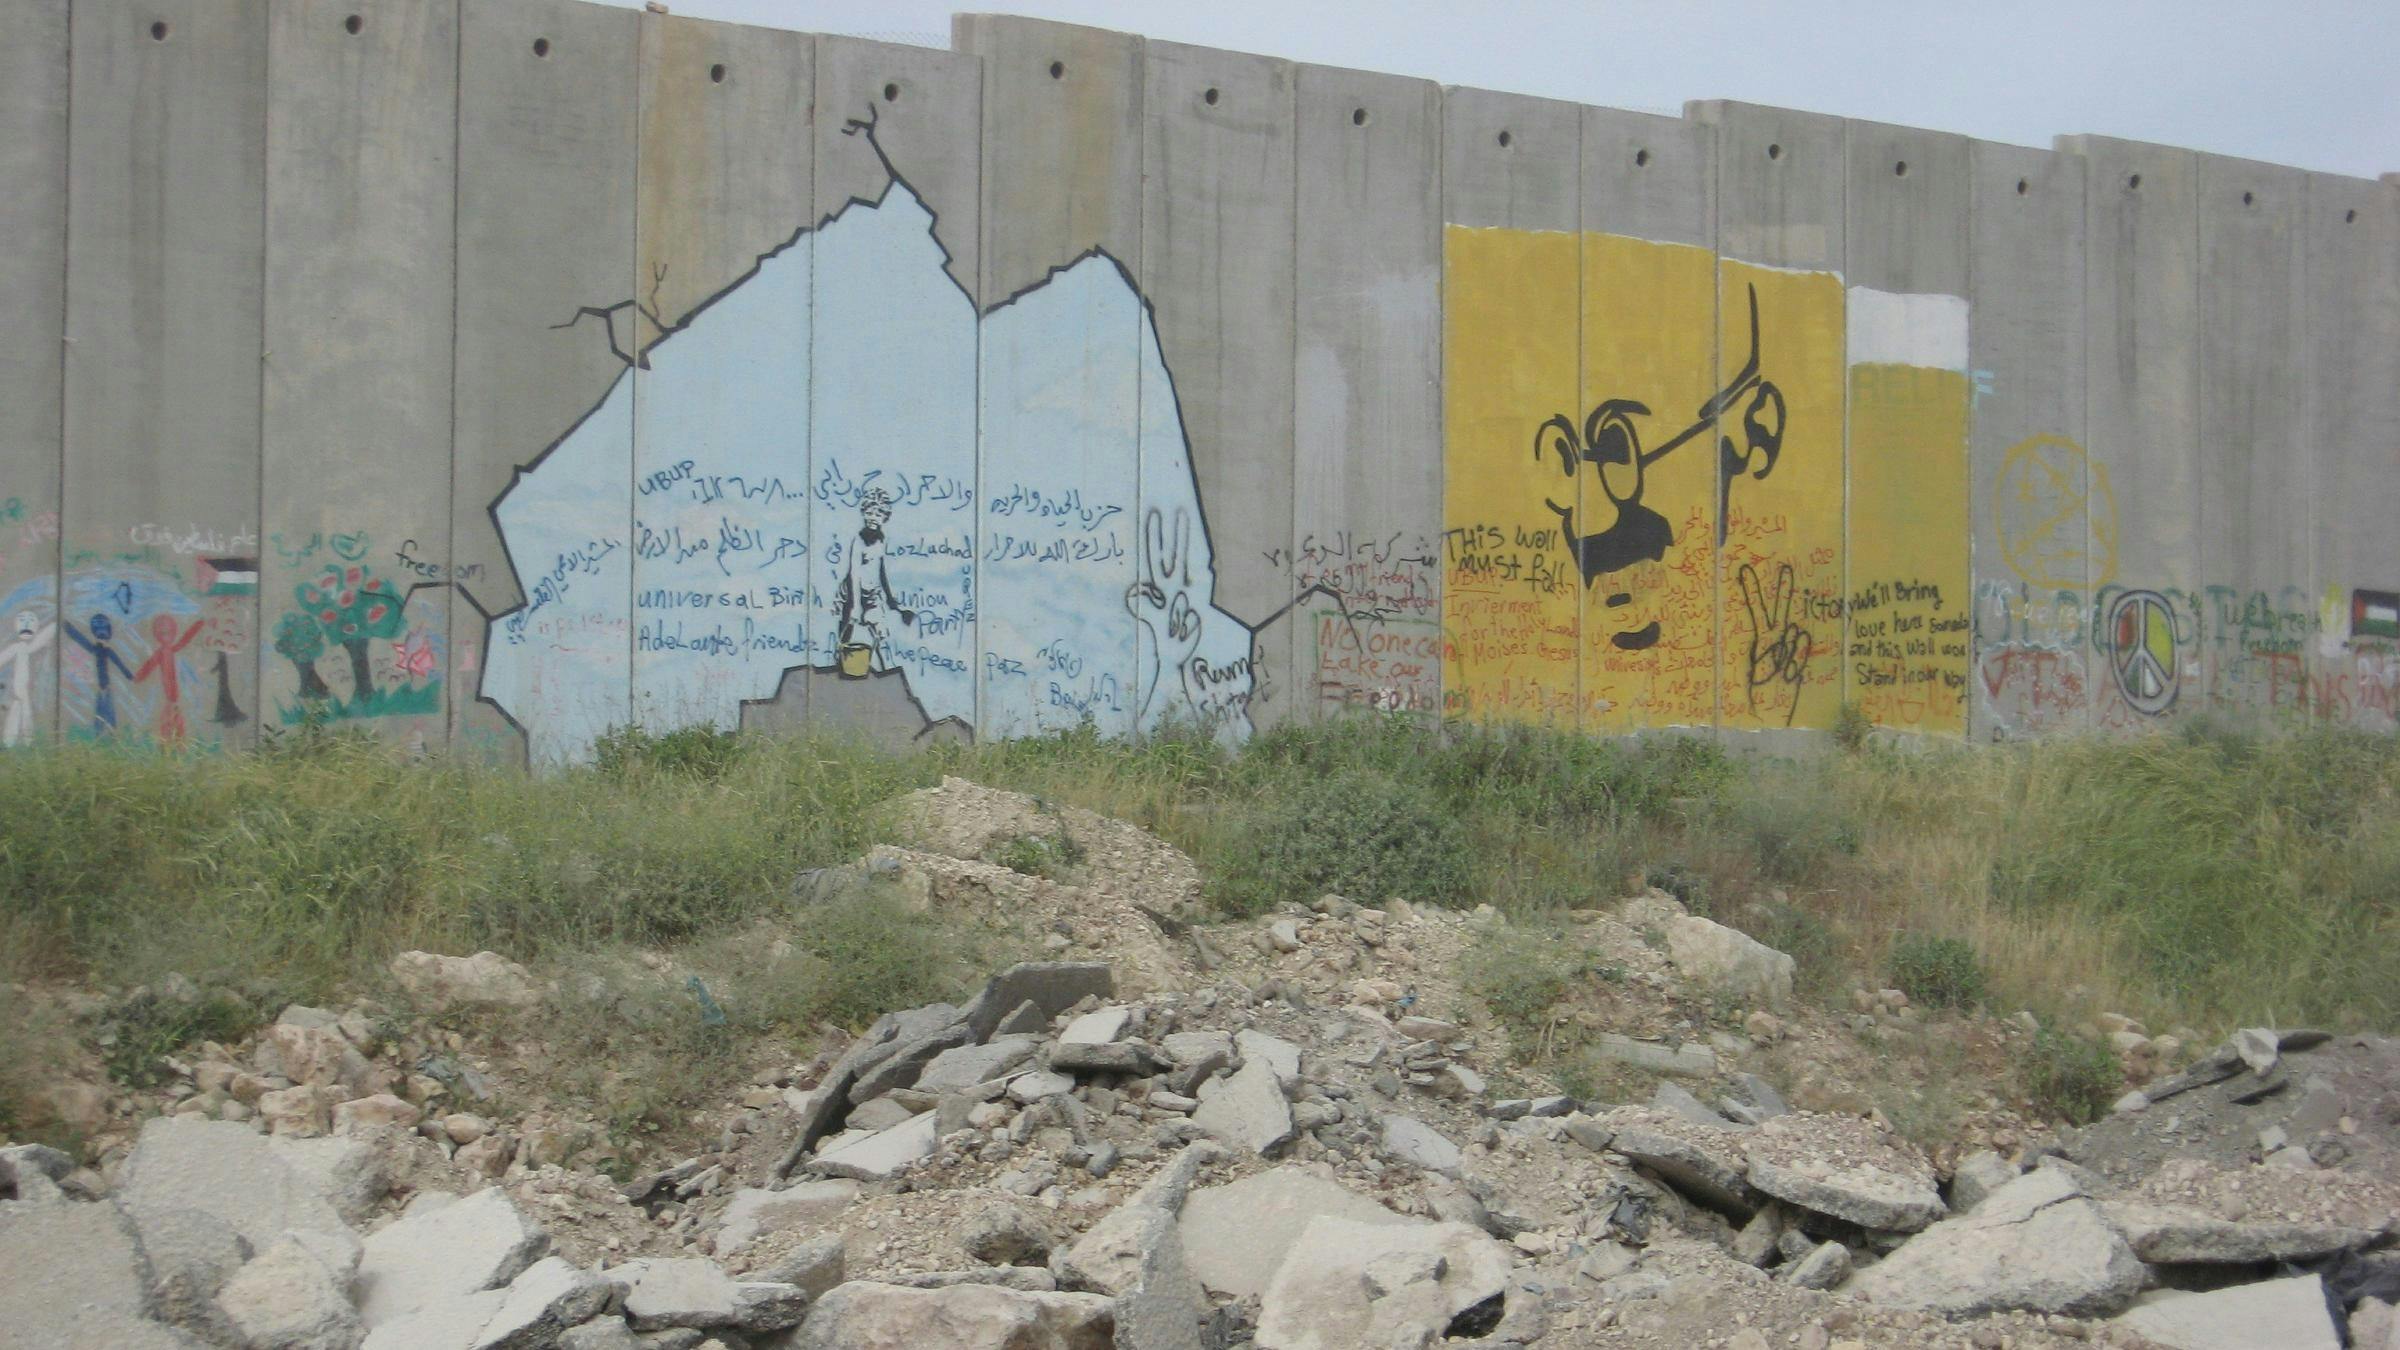 West Bank Separation Wall, showing grafitti by Banksy